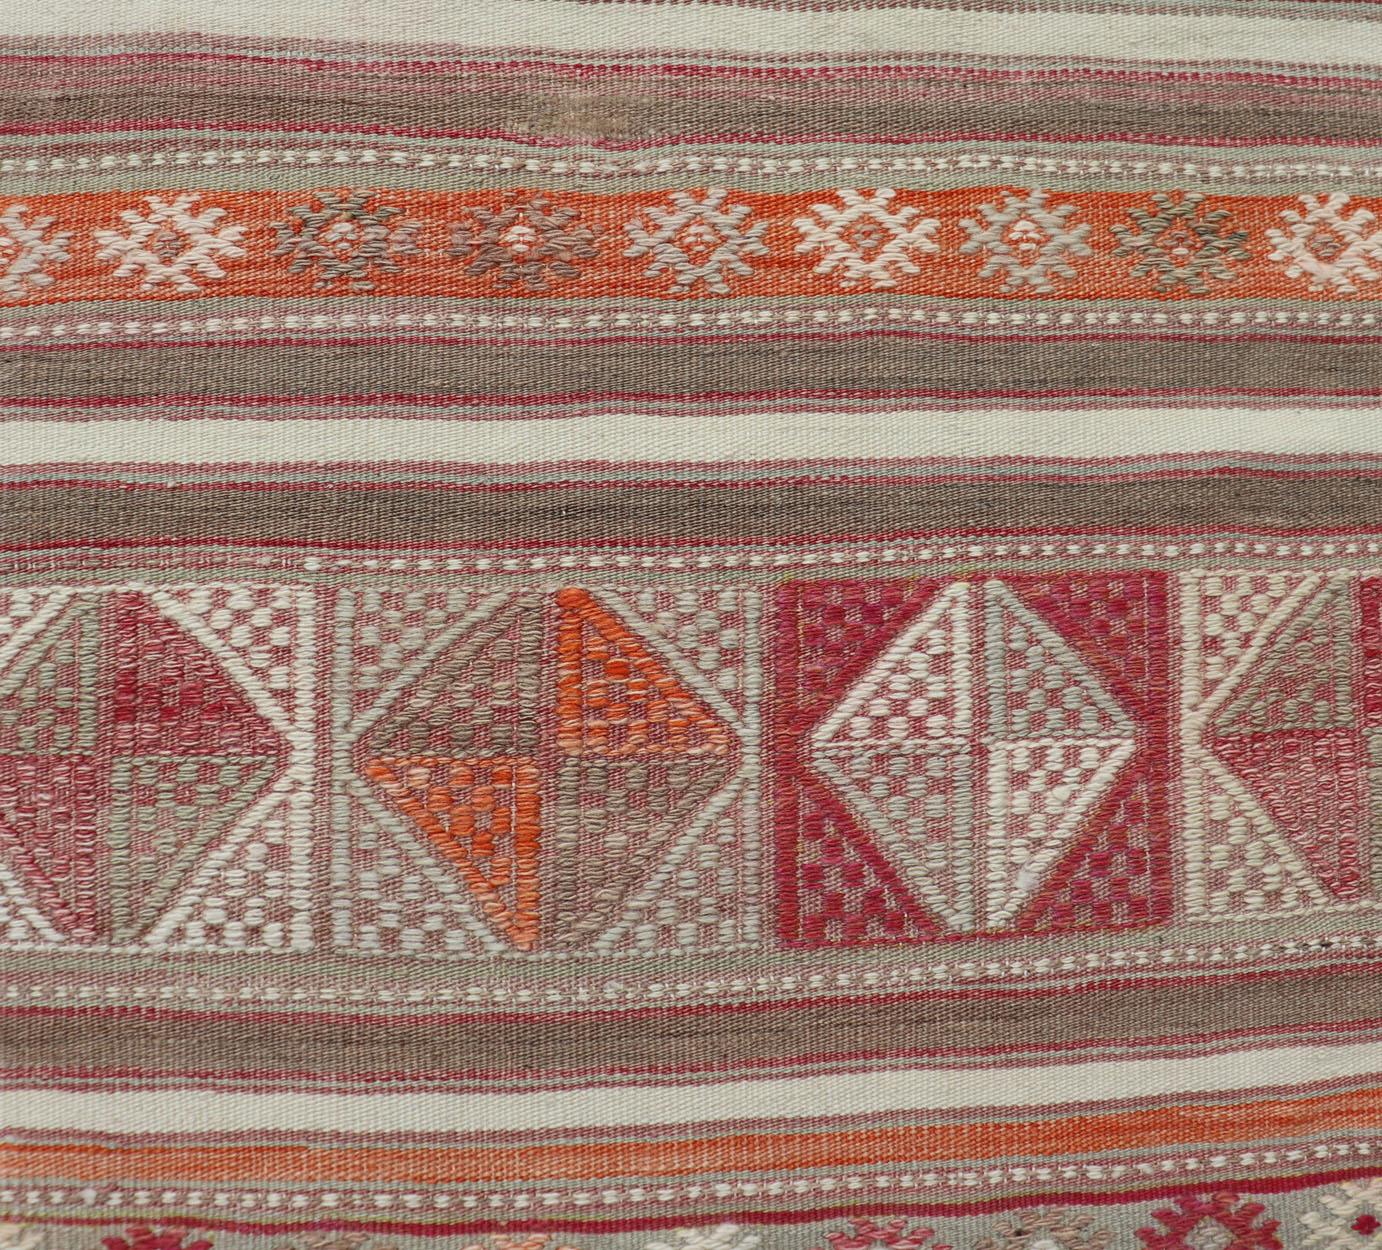 Colorful Turkish Vintage Embroidered Kilim with Stripes and Geometric Motifs In Good Condition For Sale In Atlanta, GA